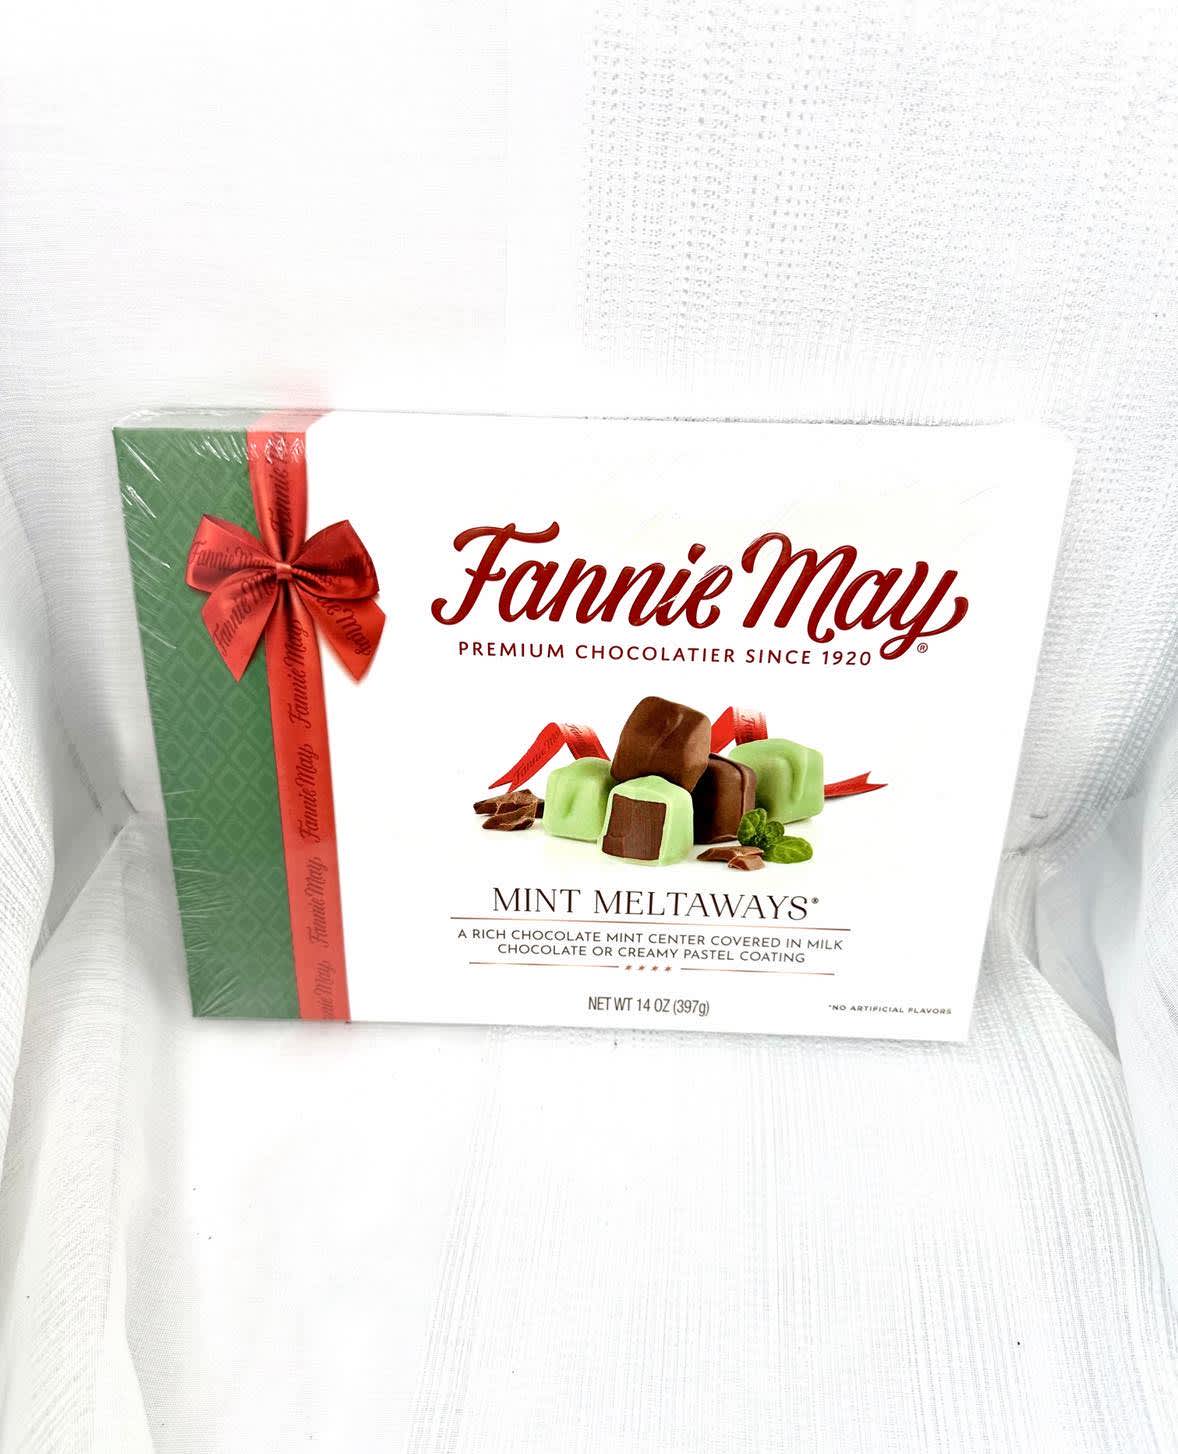 Fannie May Mint Meltaways - A rich chocolate mint center covered in milk chocolate or creamy pastel coating. 14 oz